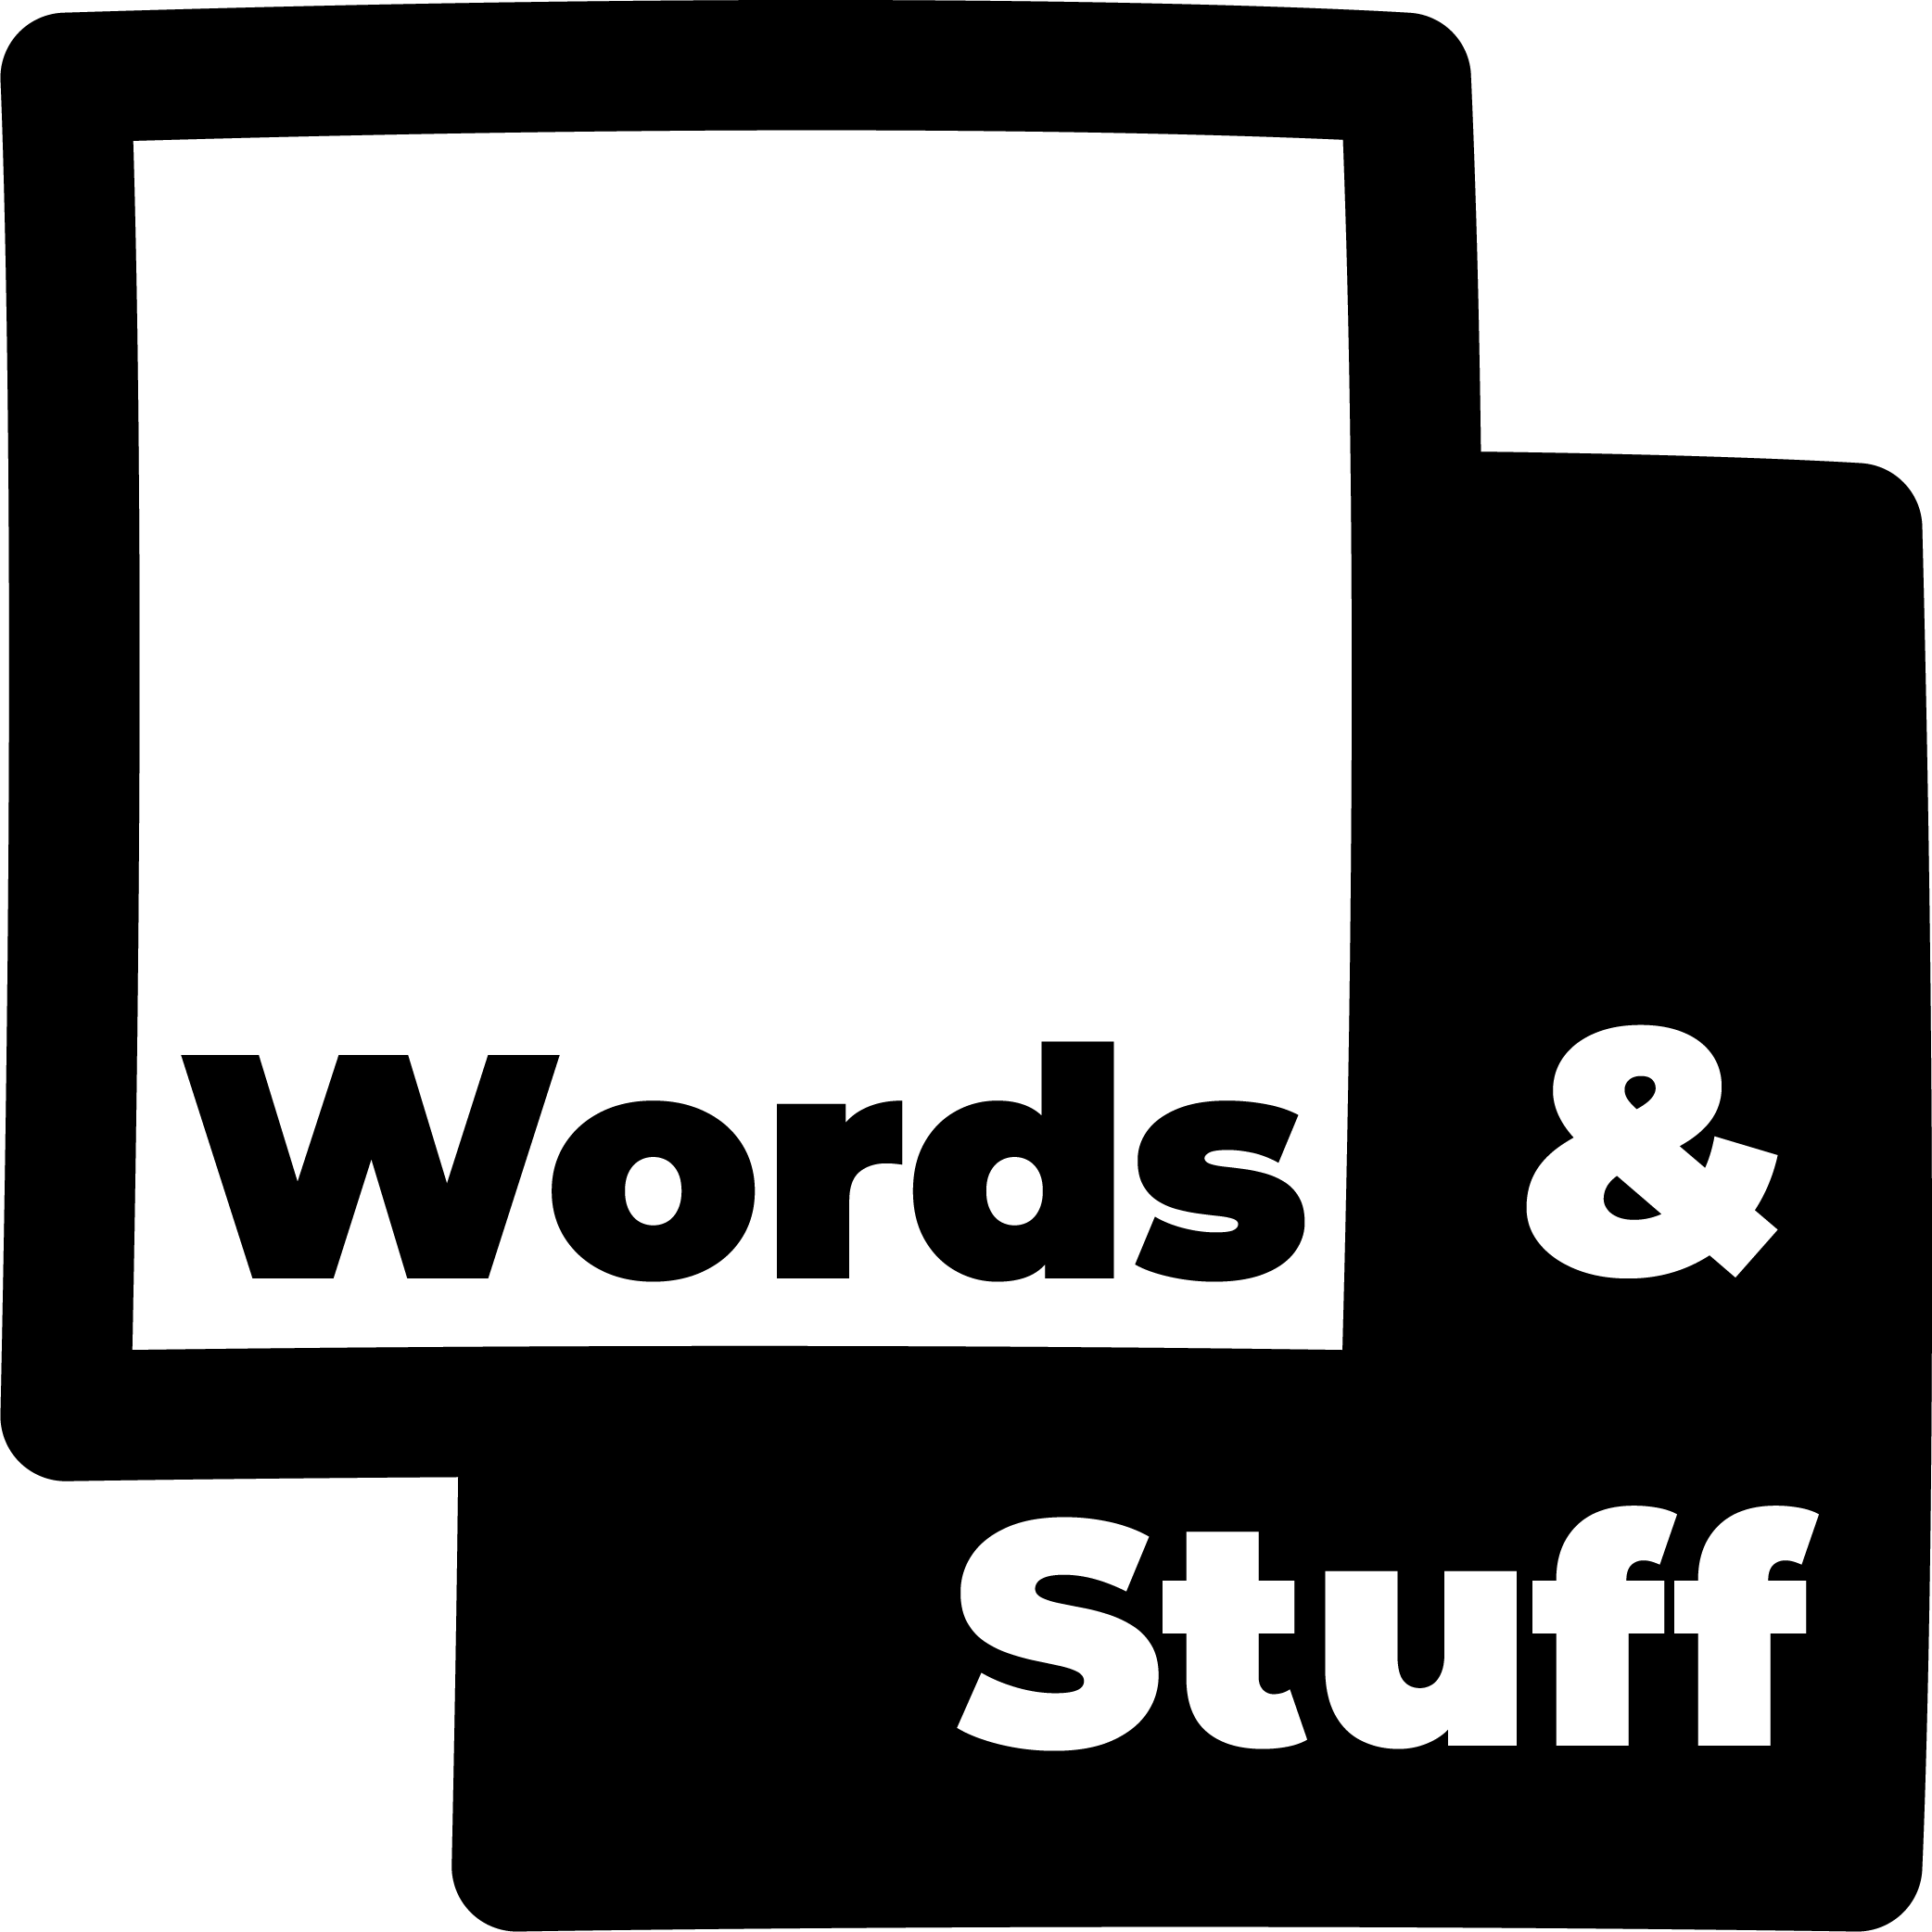 Words and Stuff